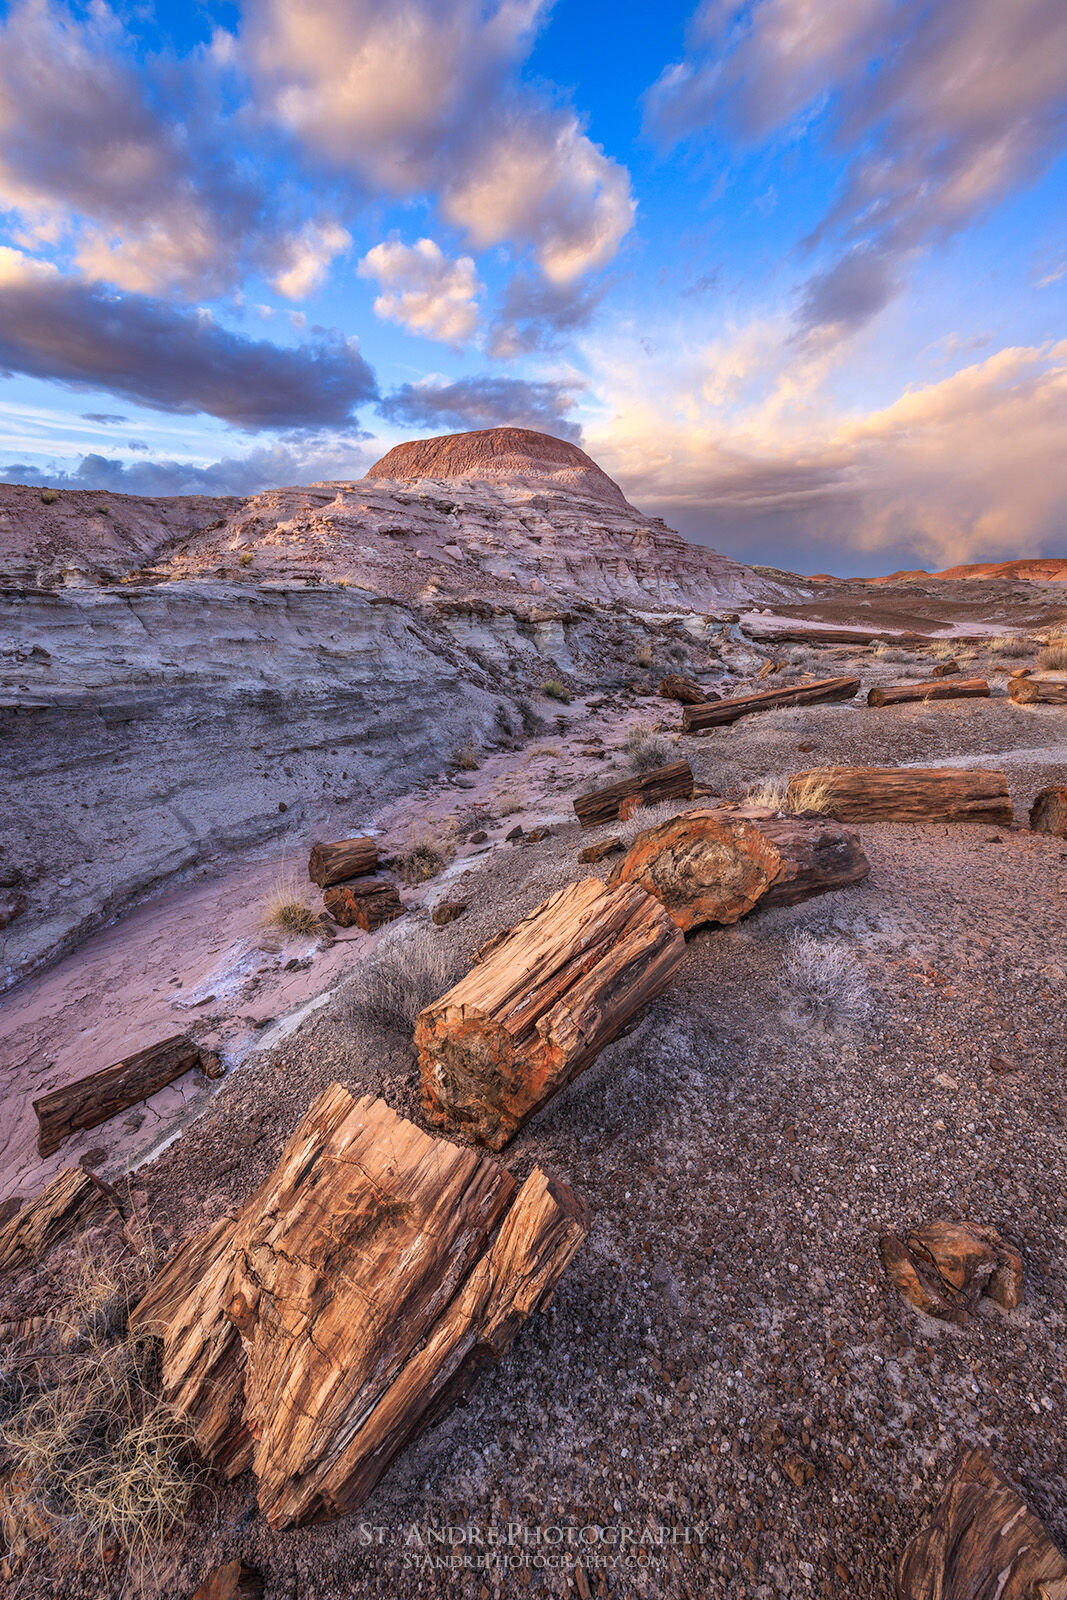 A petrified log as the foreground leads viewers to a large dome of earth in the distance.